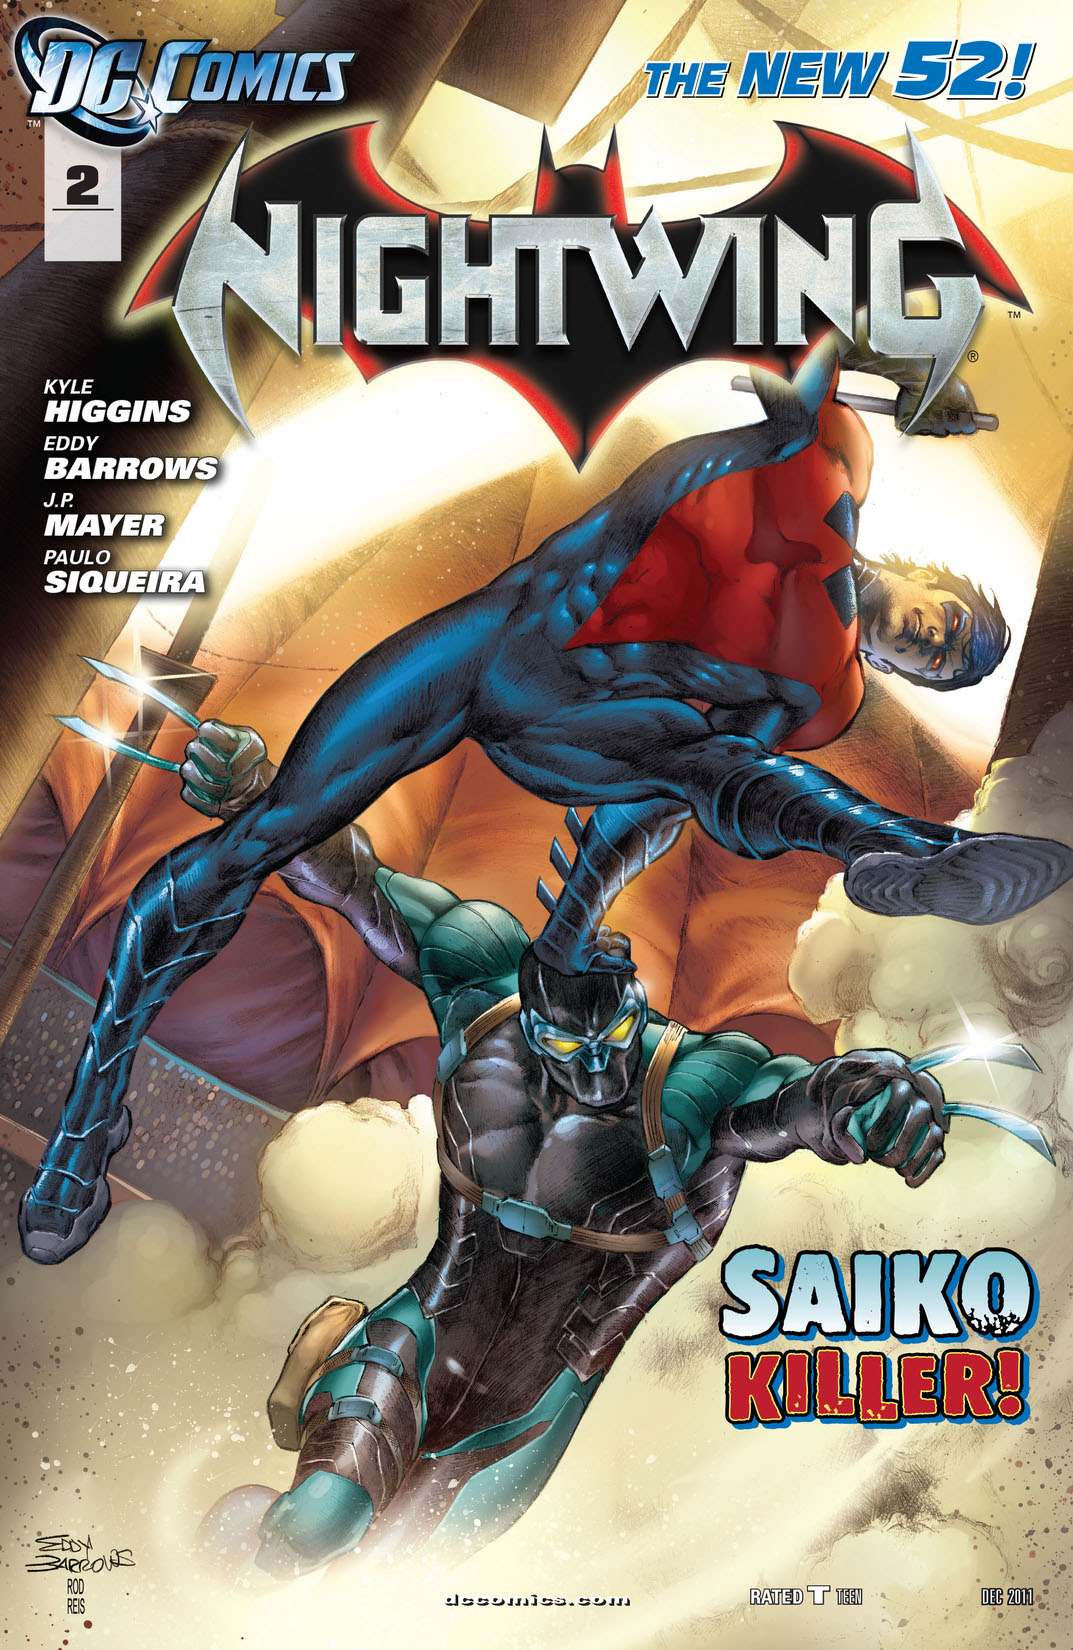 Nightwing (2011-) #2 preview images